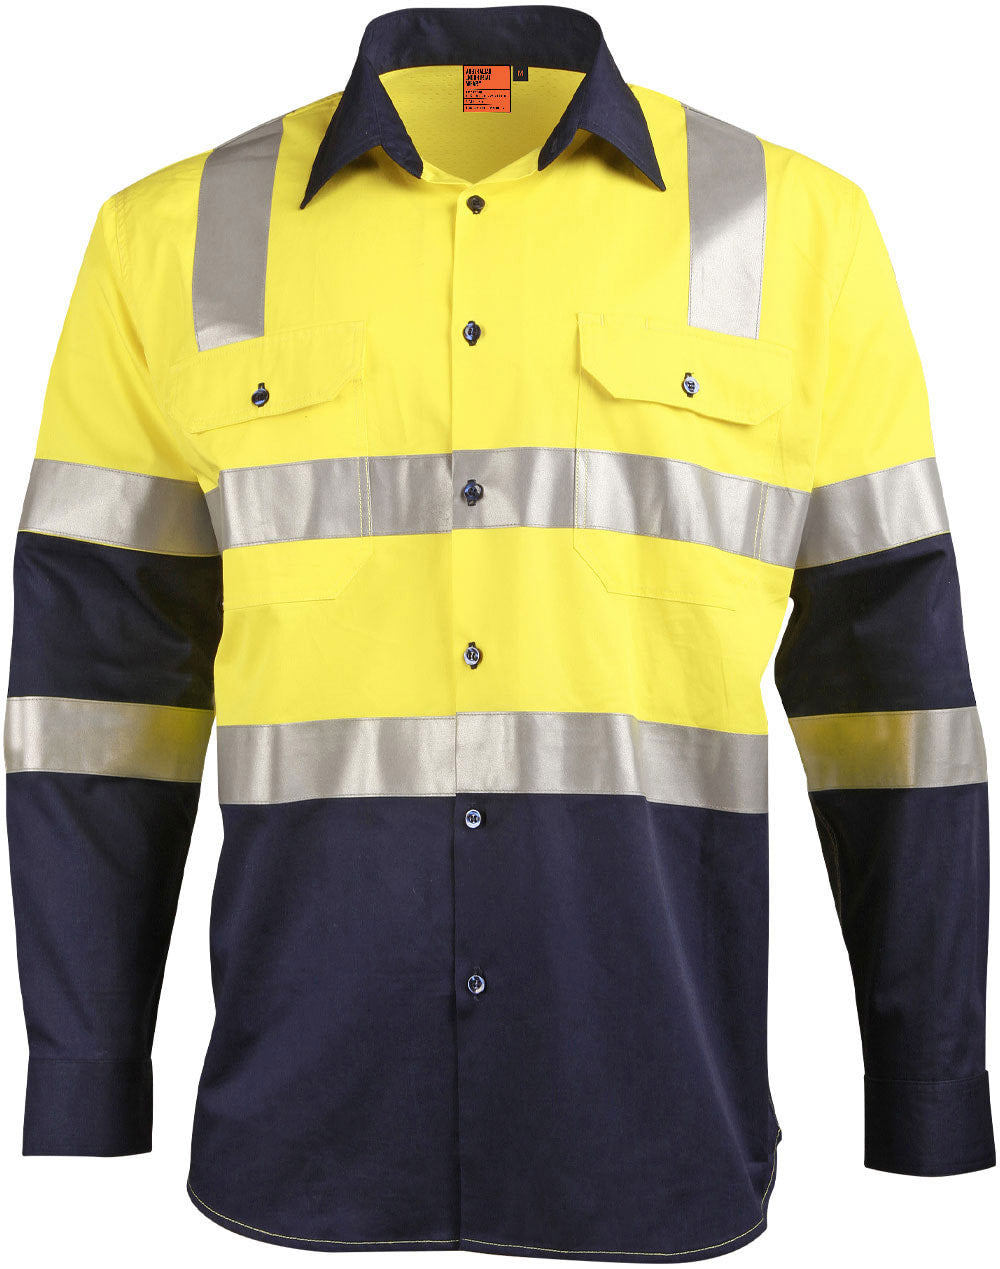 AIW SW70 Biomotion day/night light weight safety shirt with x back tape configuration